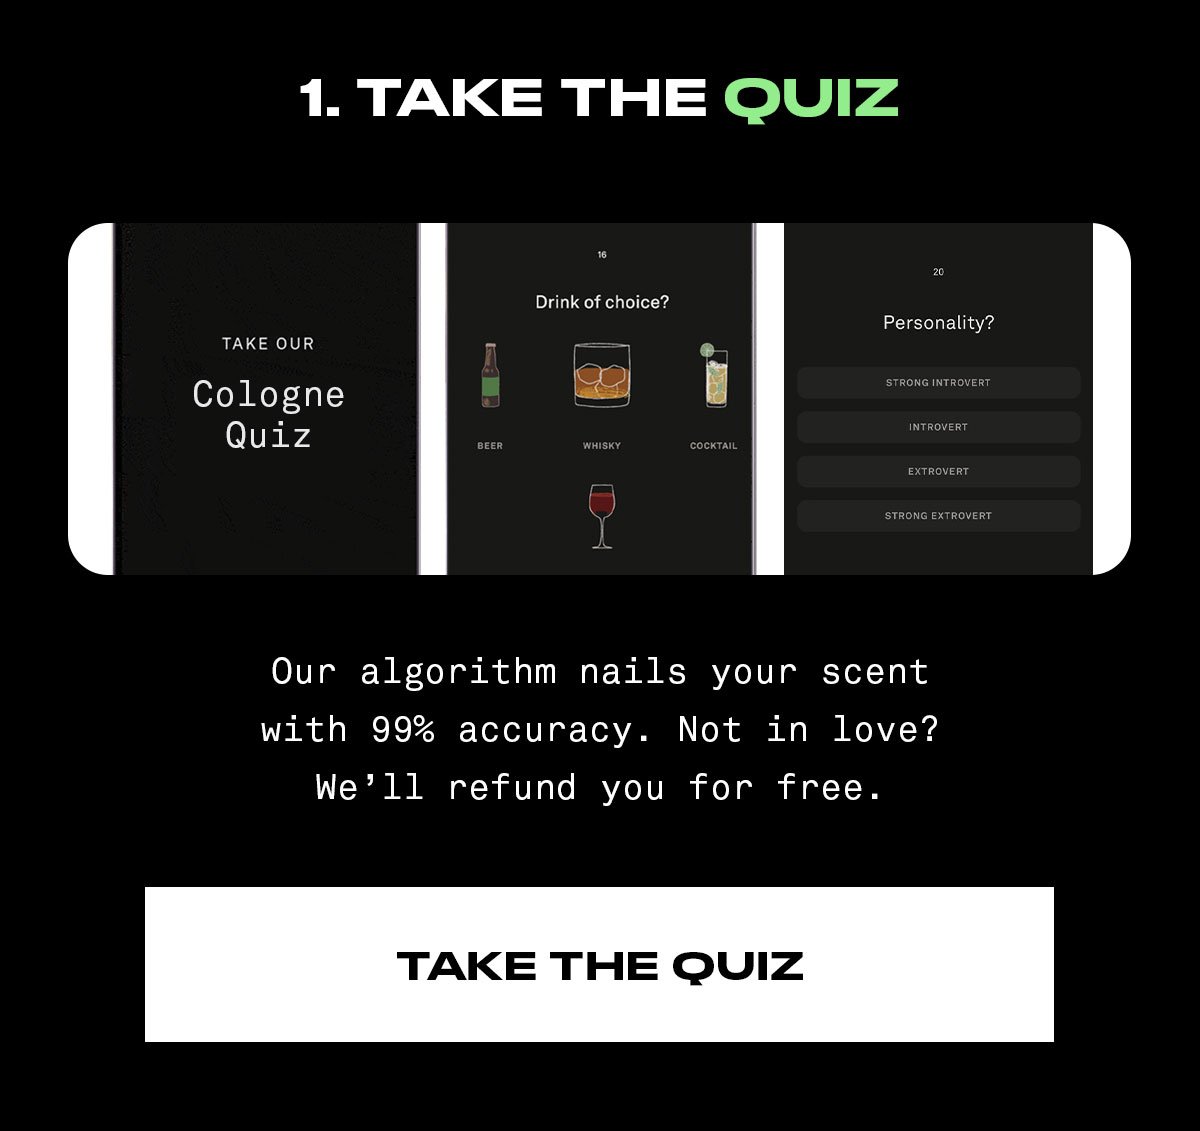 Take the quiz. Our algorithm nails your scent with 99% accuracy. Not in love? We’ll refund you for free.